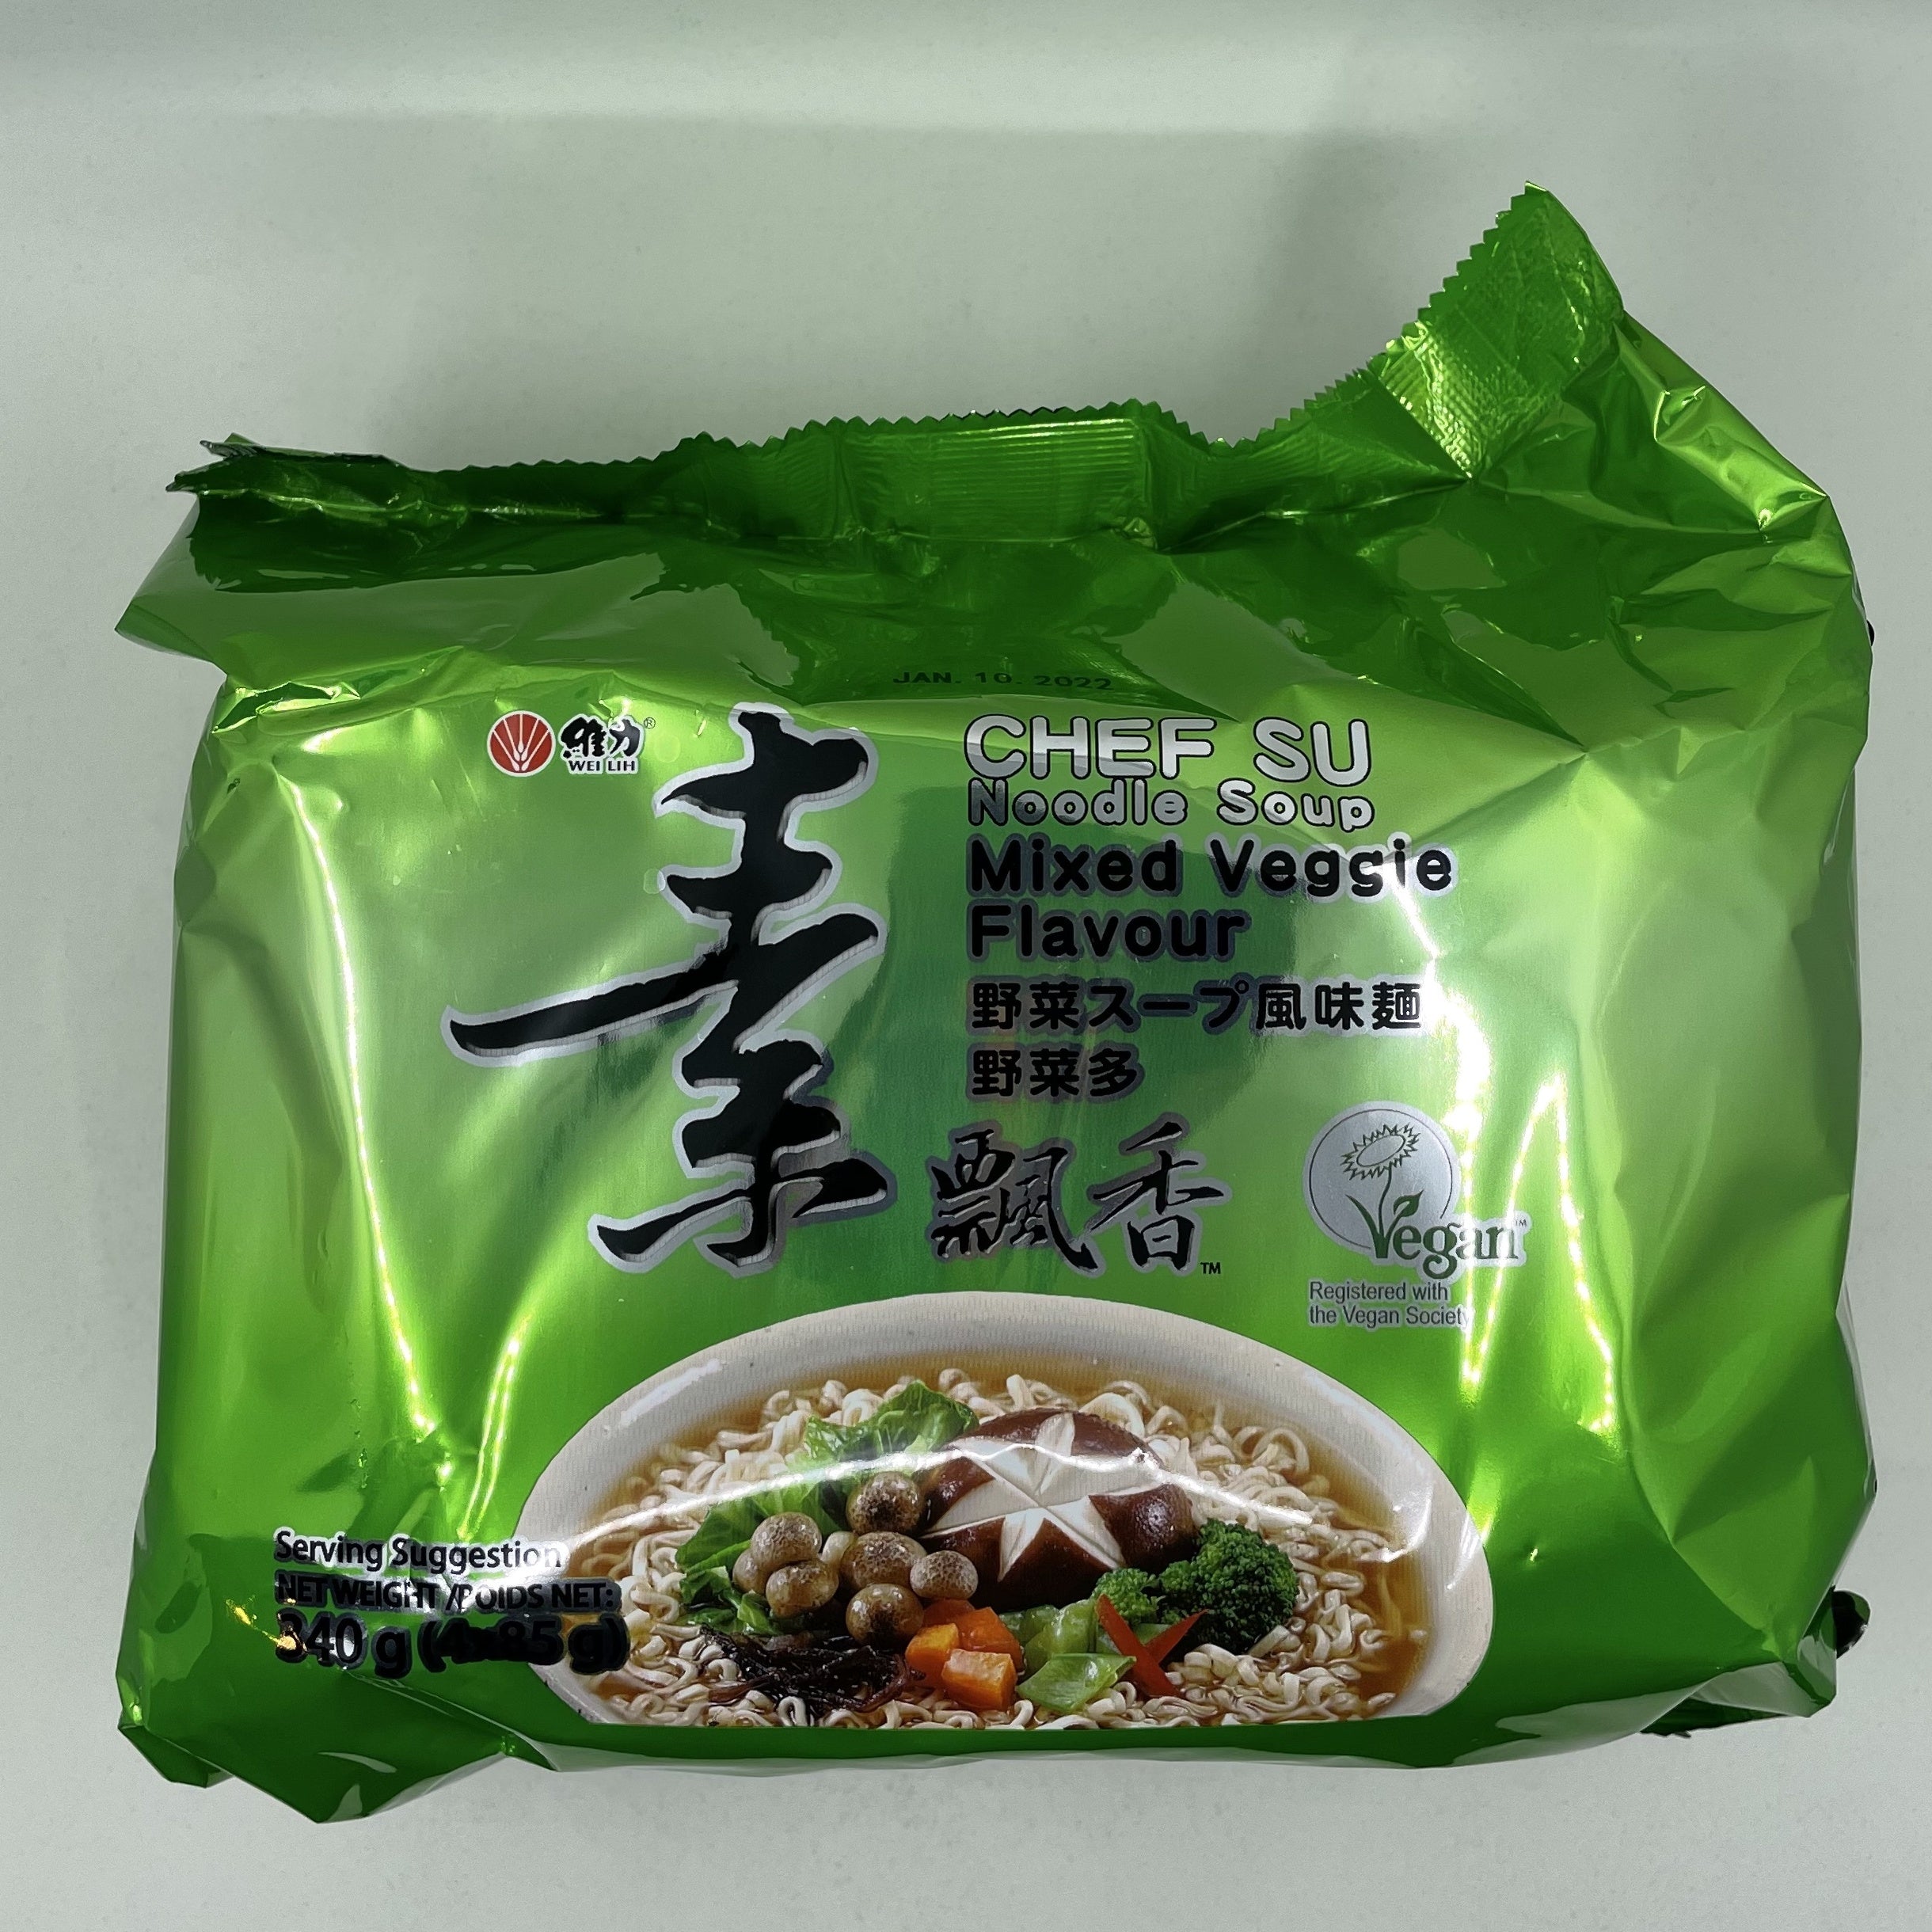 Wei Lih Chef Su Instant Noodle-Mixed Veggie Flavour 維力素飄香野菜多風味麵340g (4x85g)